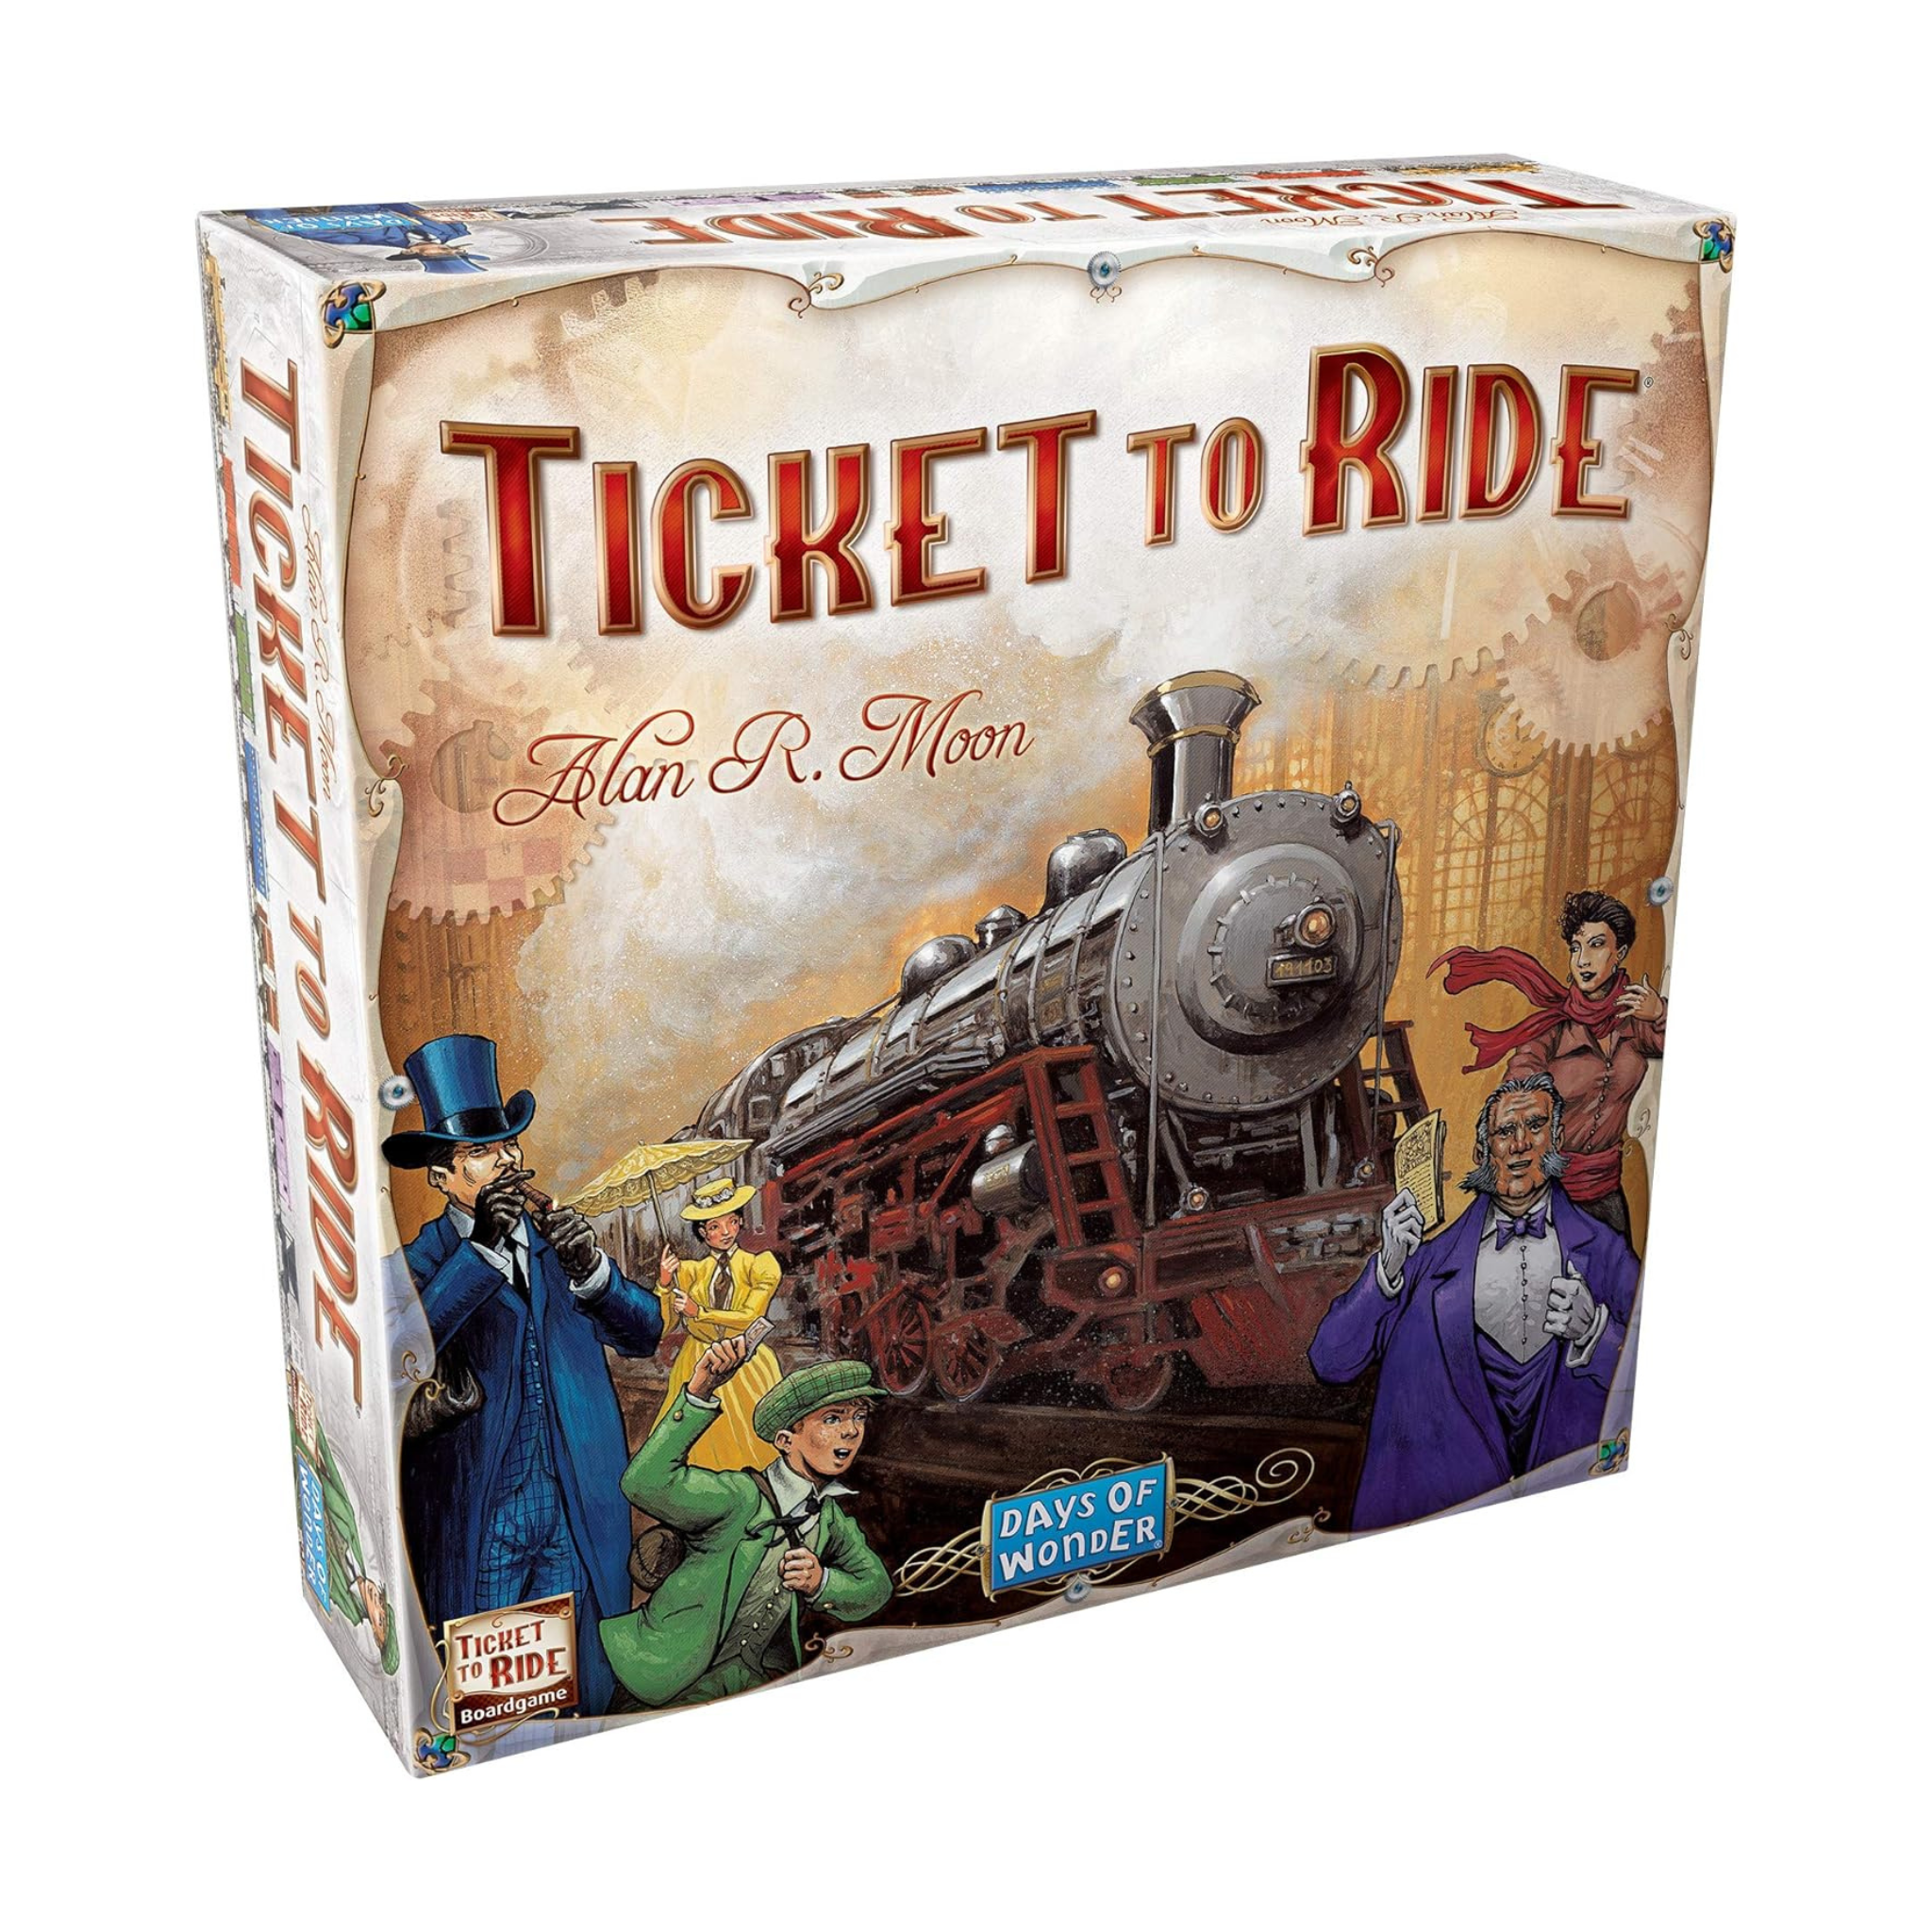 Ticket to Ride Board Game or Catan Board Game